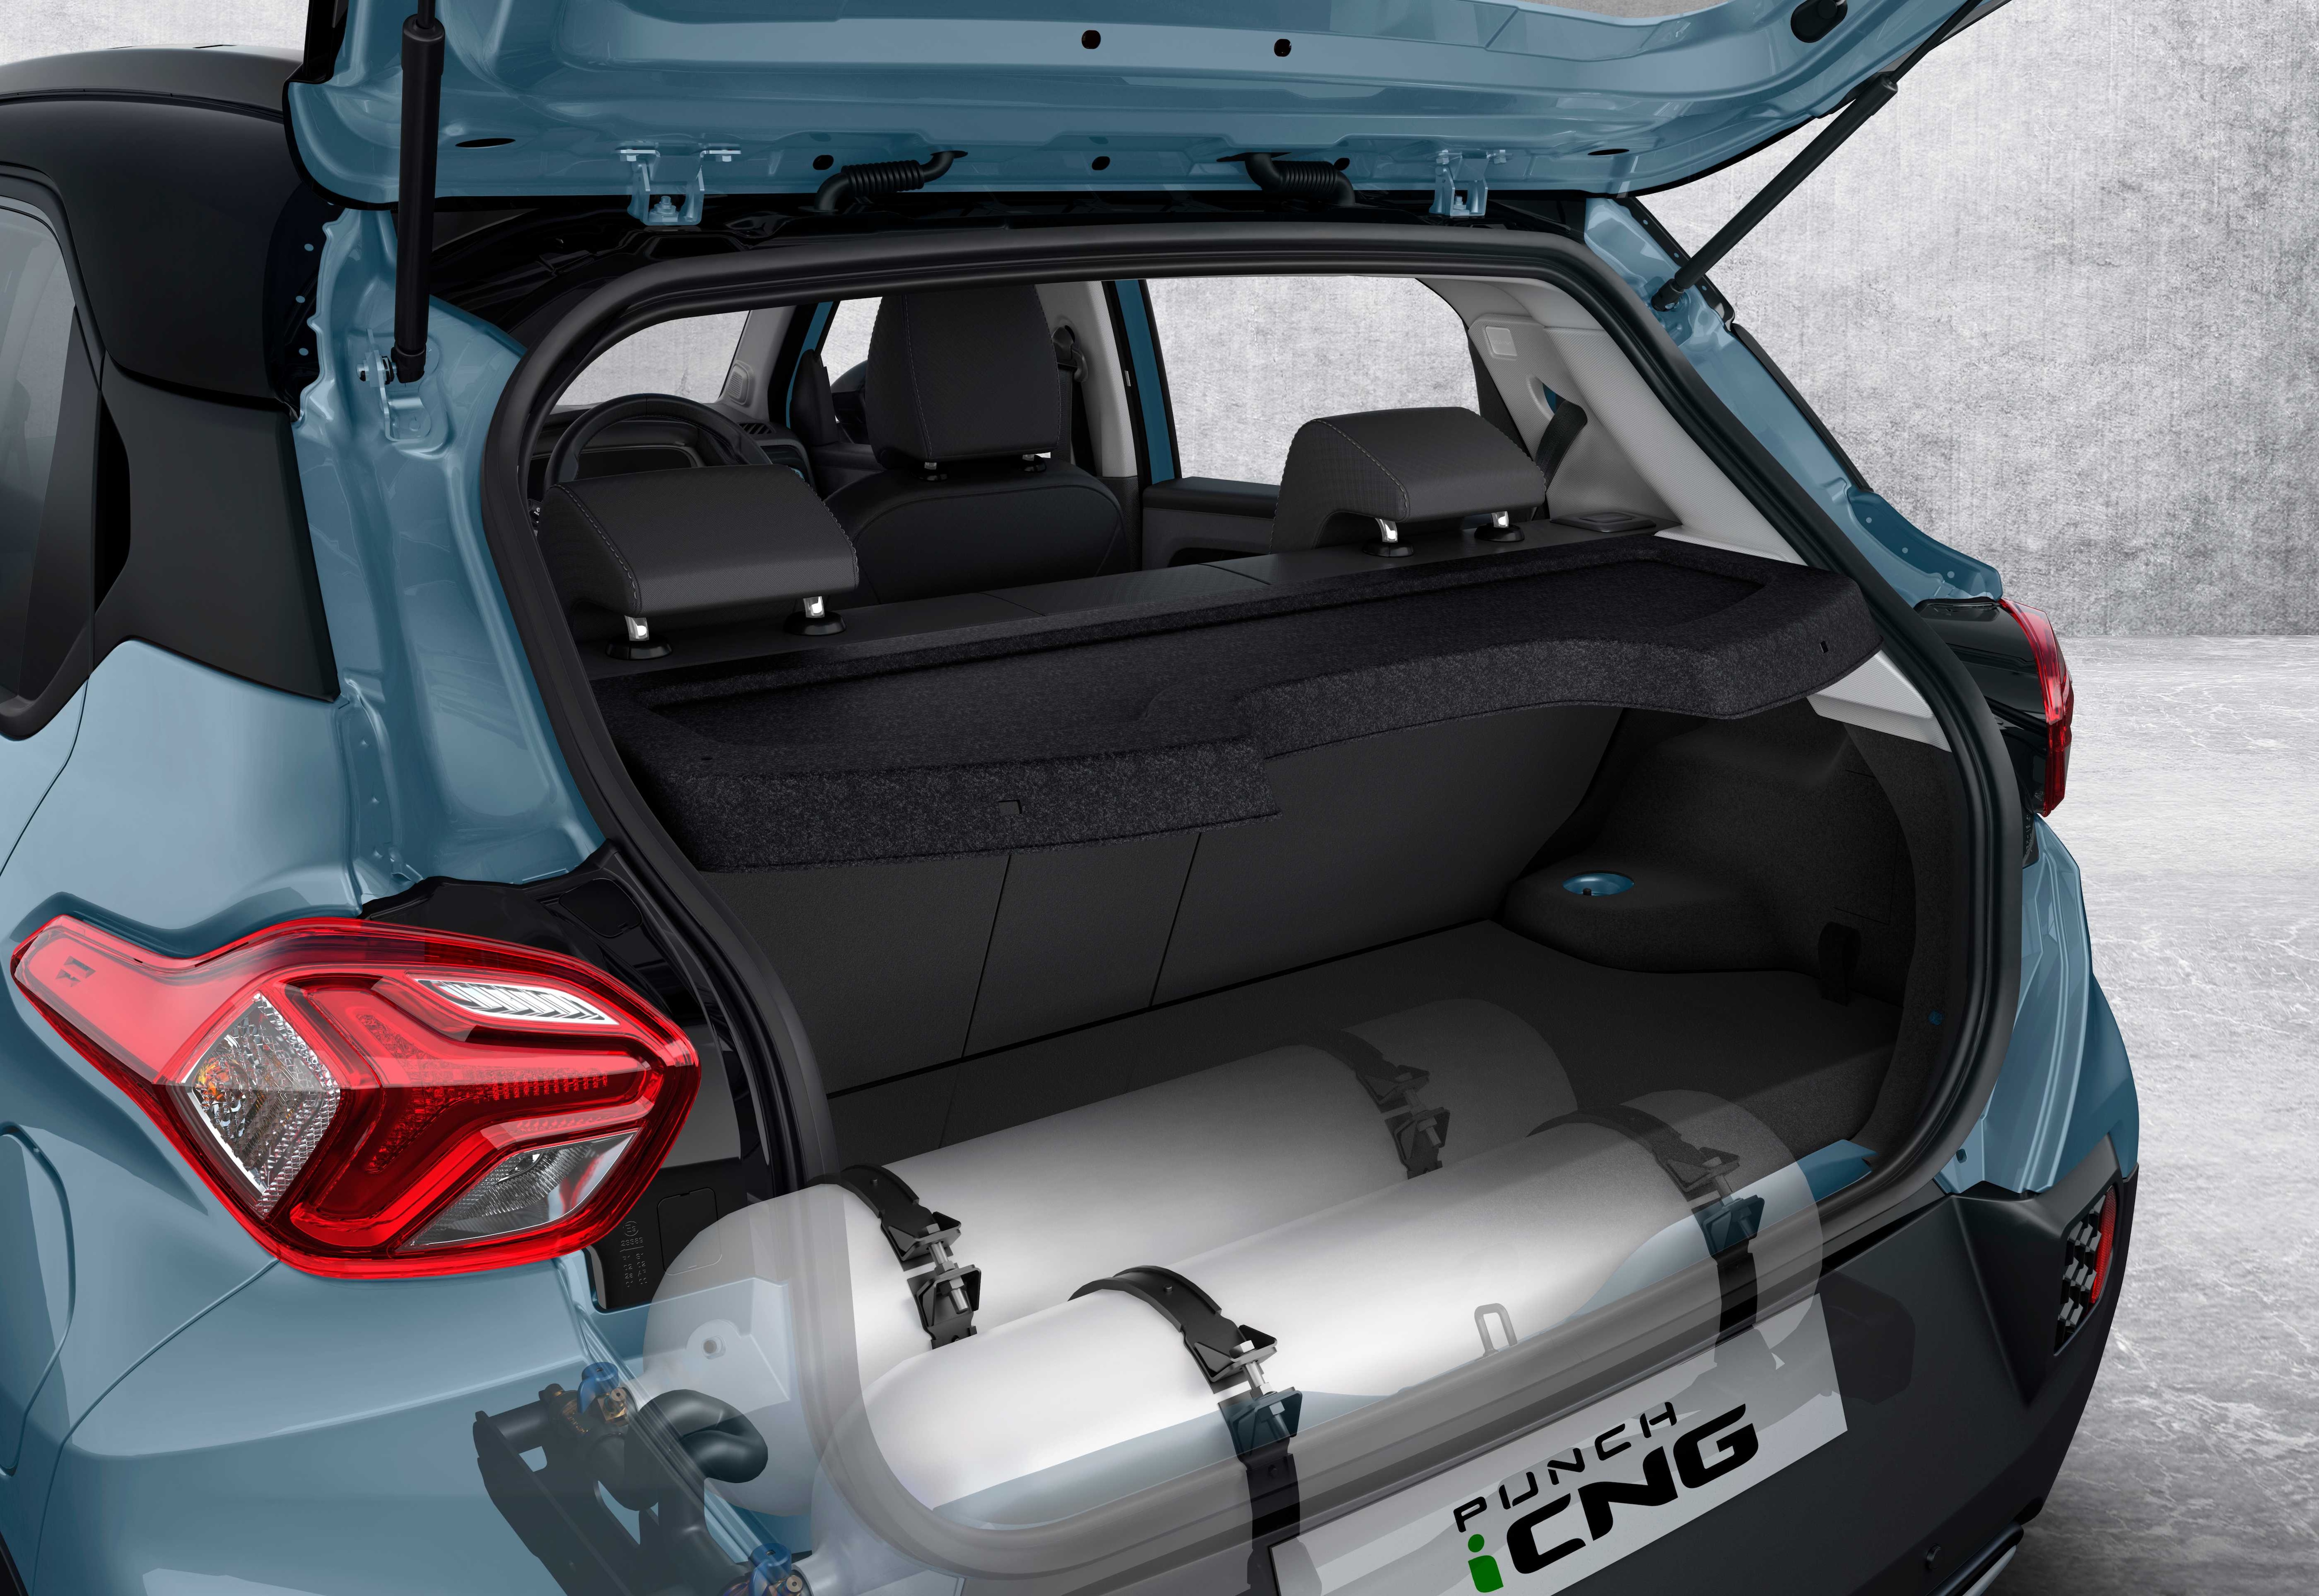 The cylinder are placed below the cargo area in the boot on the Tiago and Tigor, as seen on the Punch iCNG version above